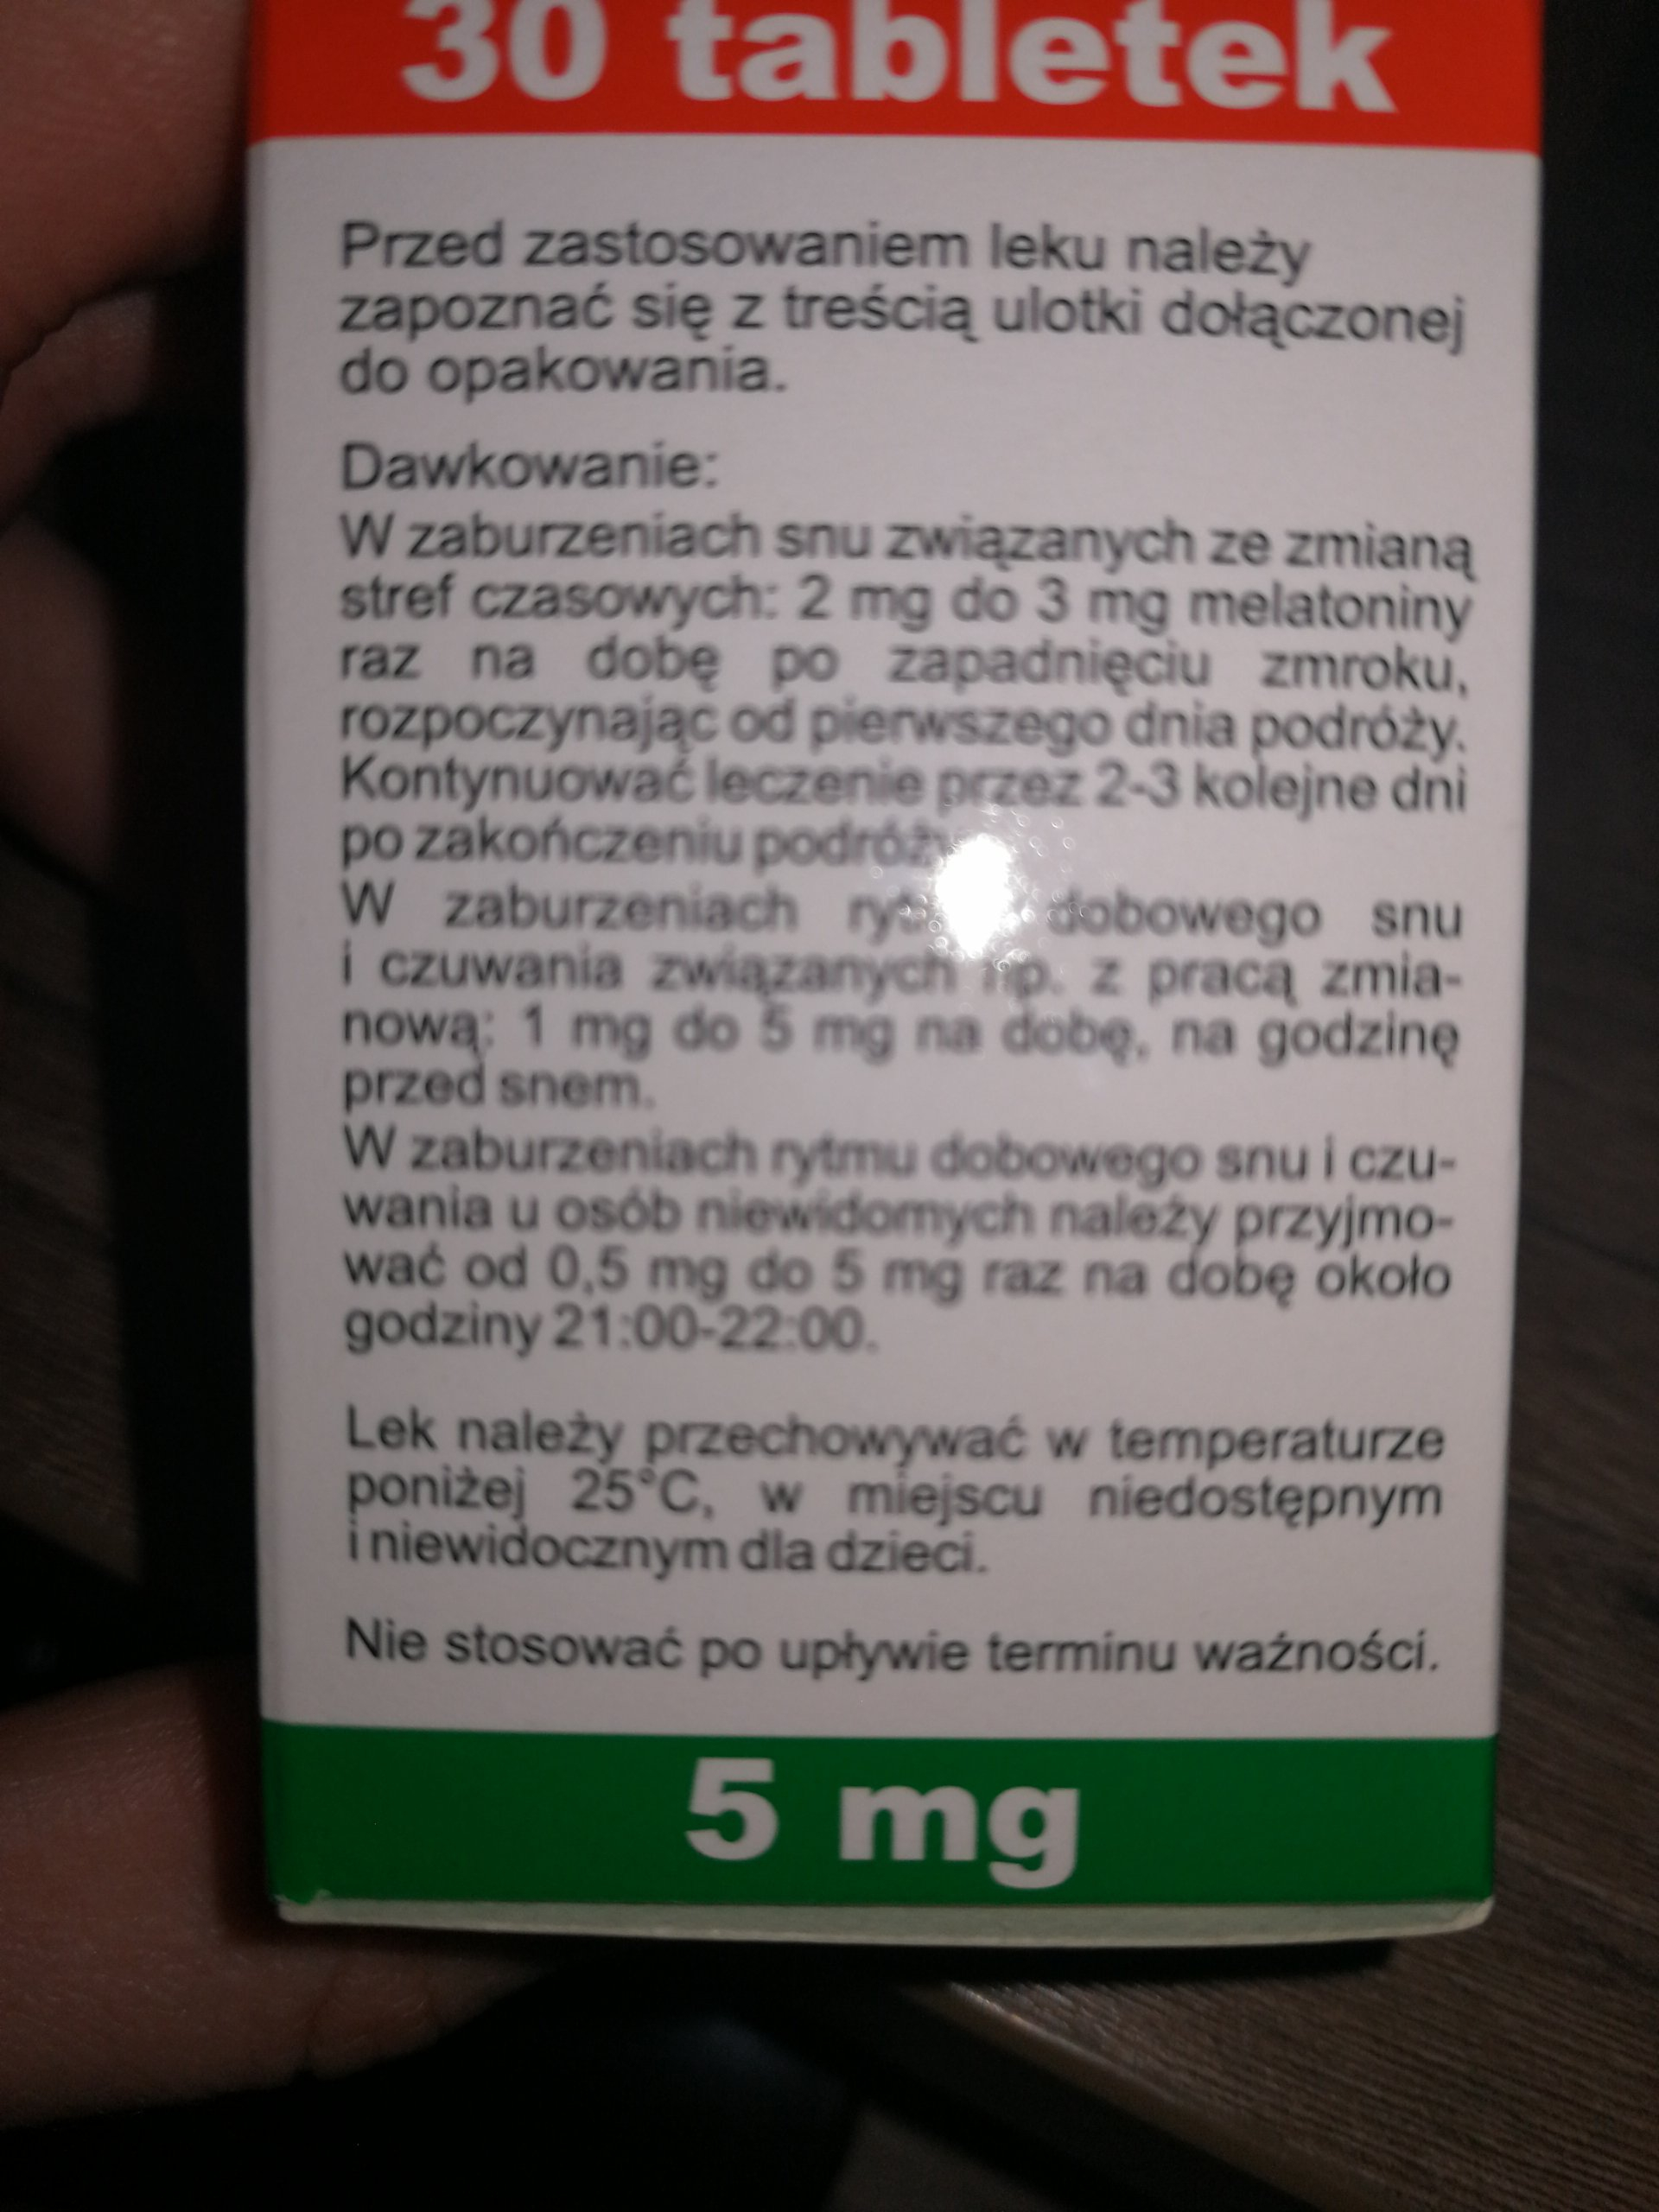 cenforce 100 mg for sale